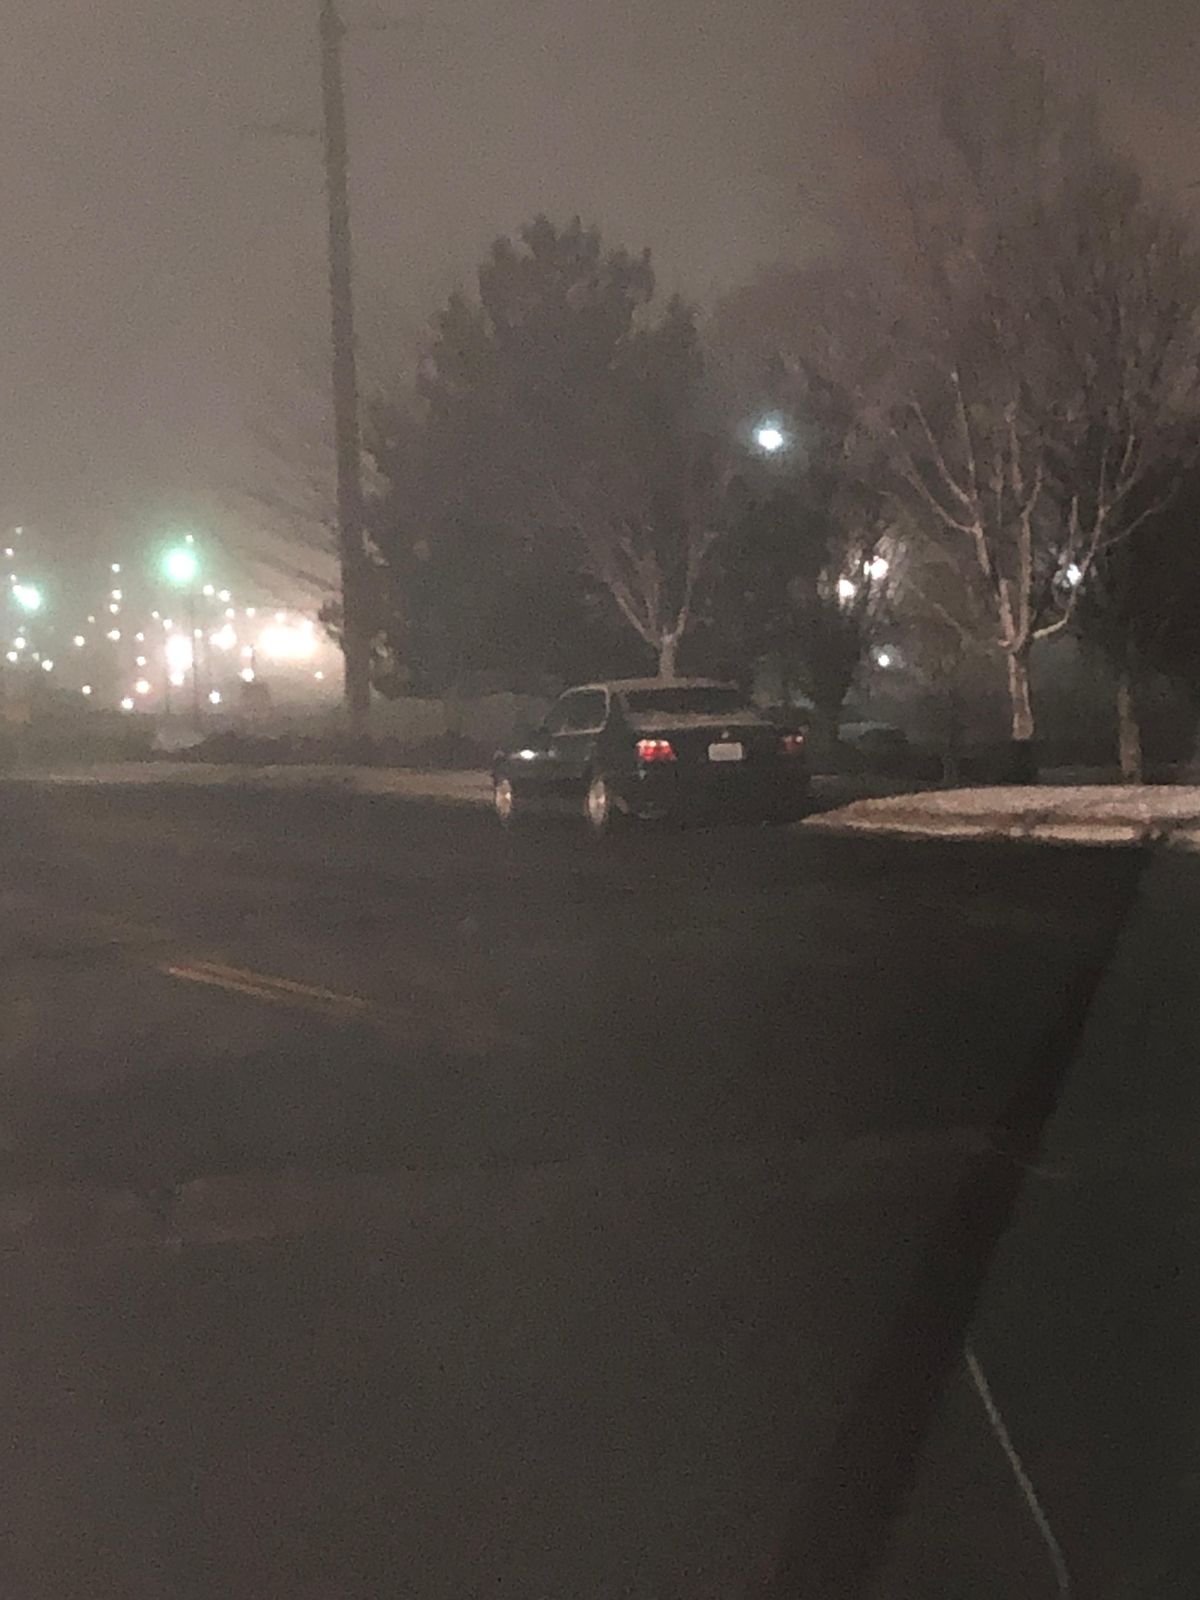 A black BMW belonging to Ryan S. Palmer is shown Thursday, Dec. 27, 2018, in an industrial area in Moses Lake. Authorities said they found bomb-making materials in the car during a routine traffic stop, and Palmer, 39, allegedly told investigators he had toyed with the idea of blowing up an agricultural products plant where he used to work. (Grant County Sheriff’s Office)